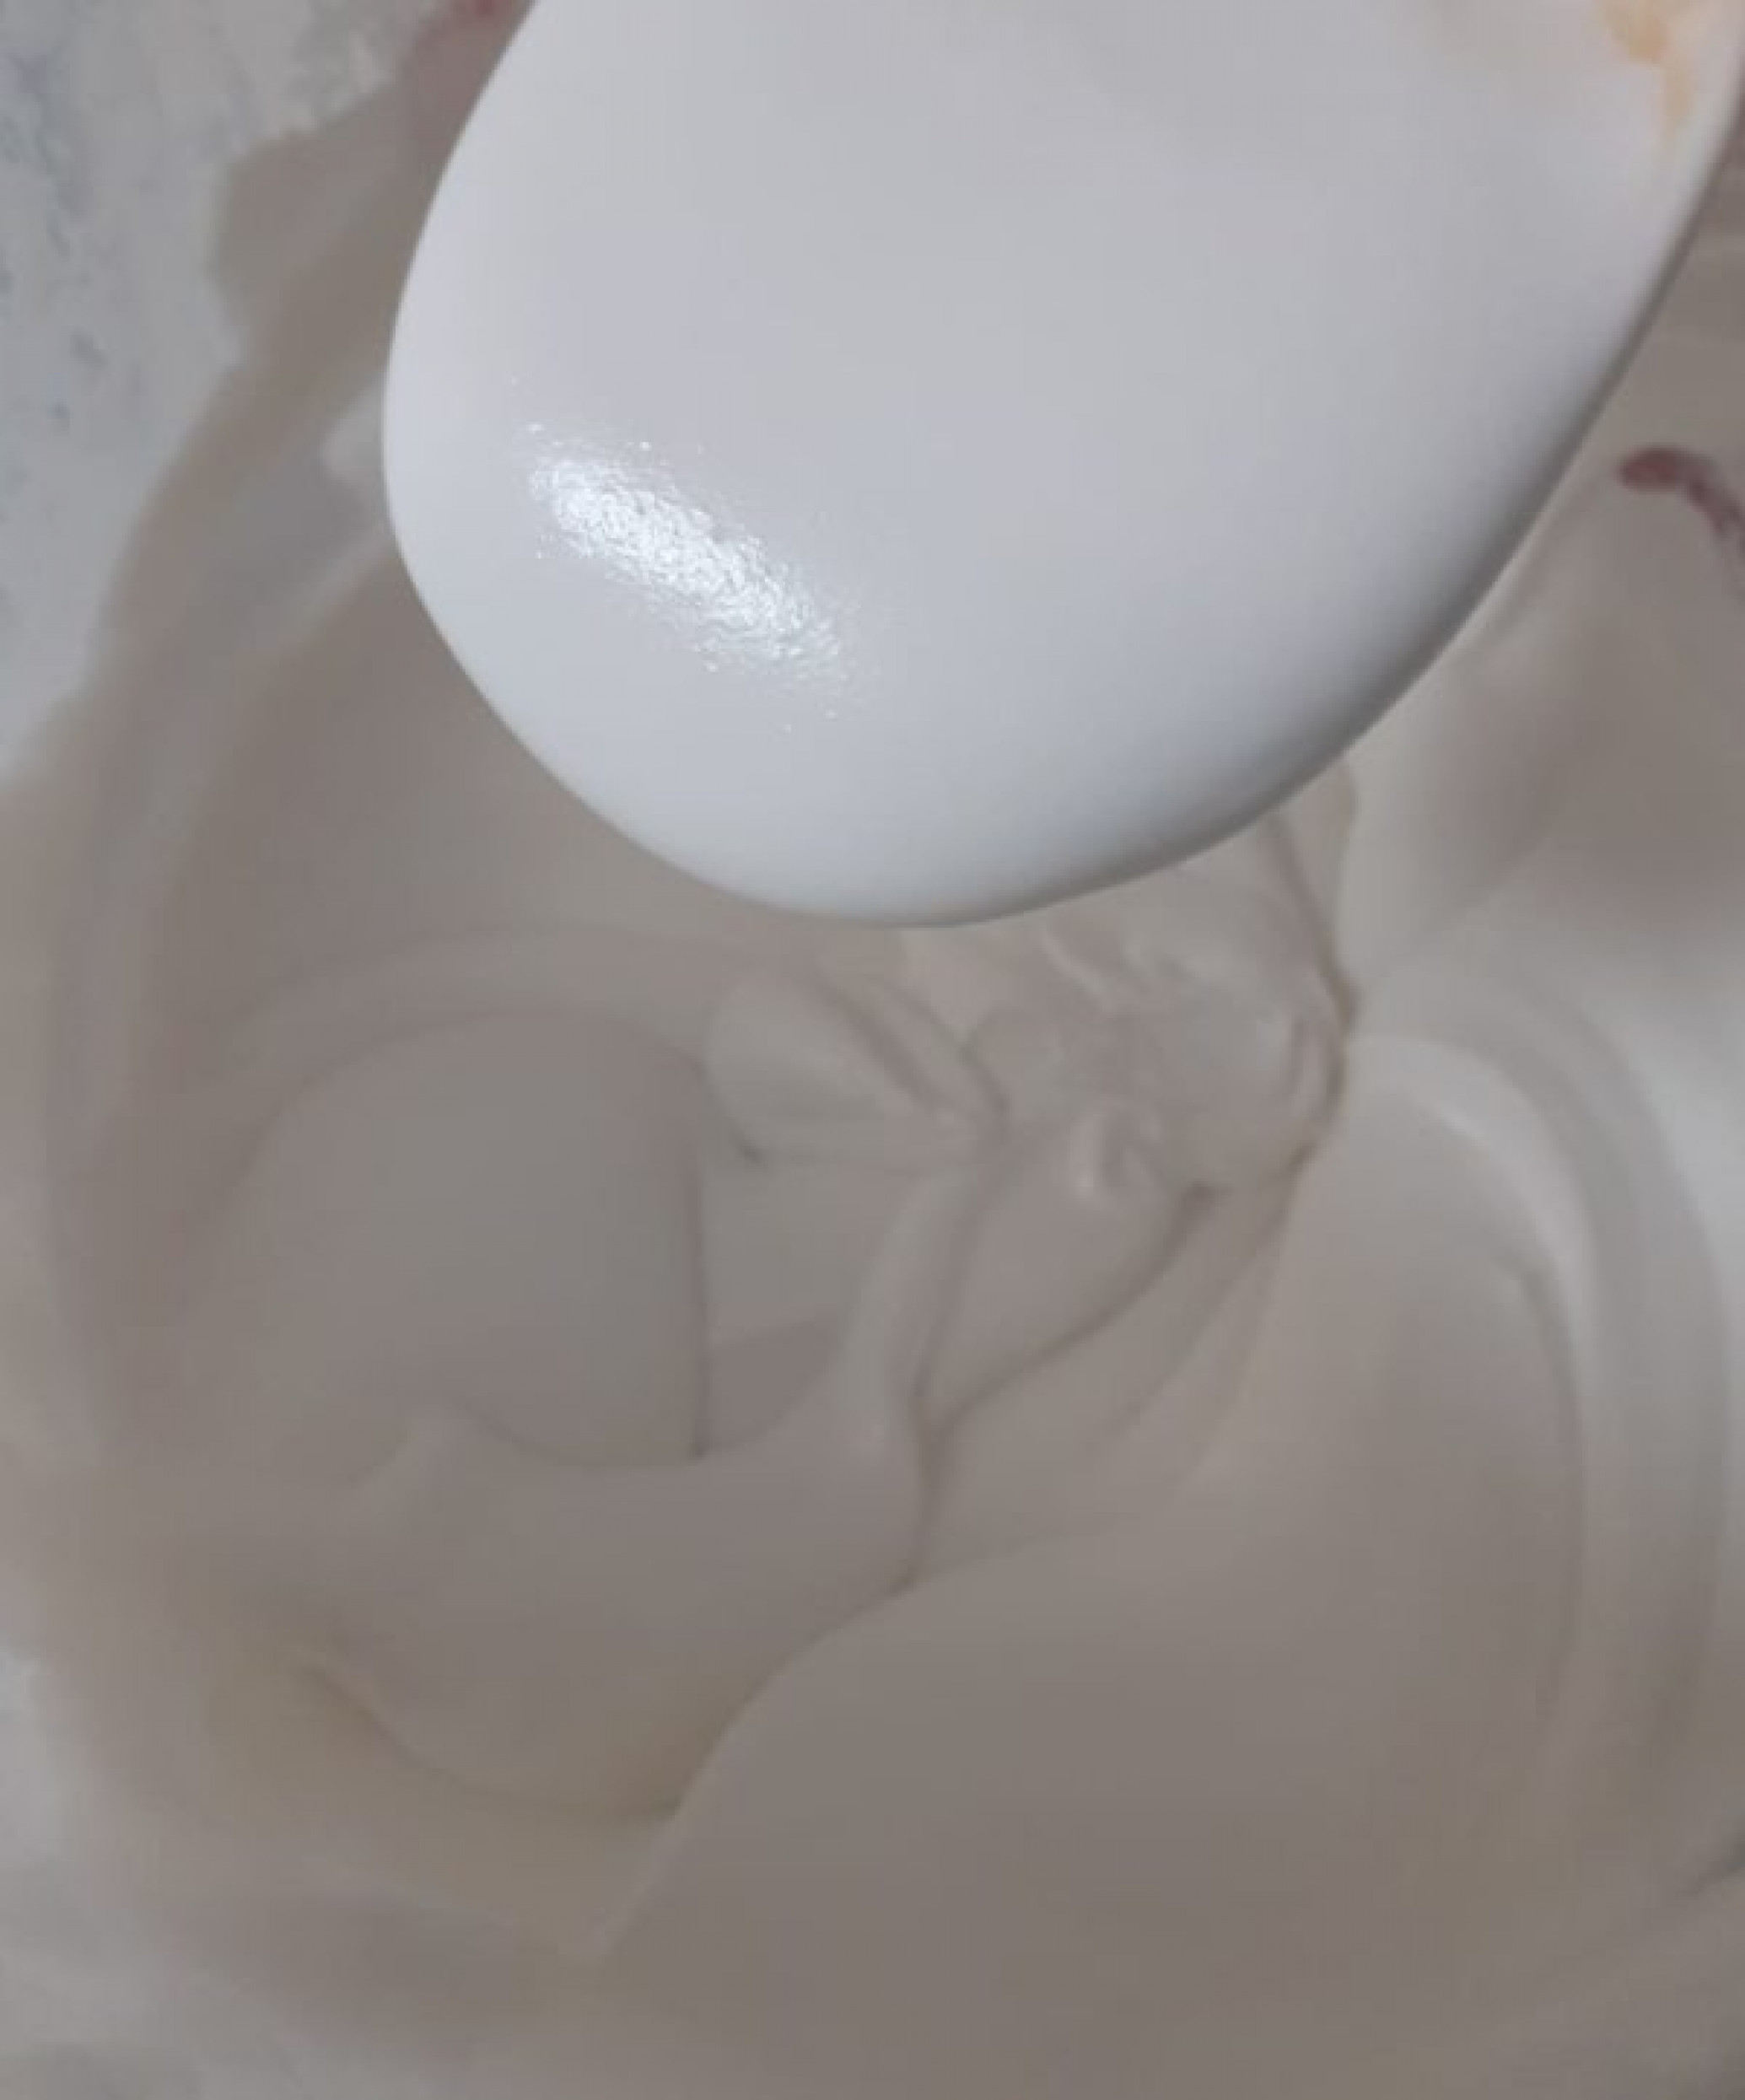 Lotion Base Manufacturers in India, Body Lotion Base Exporter